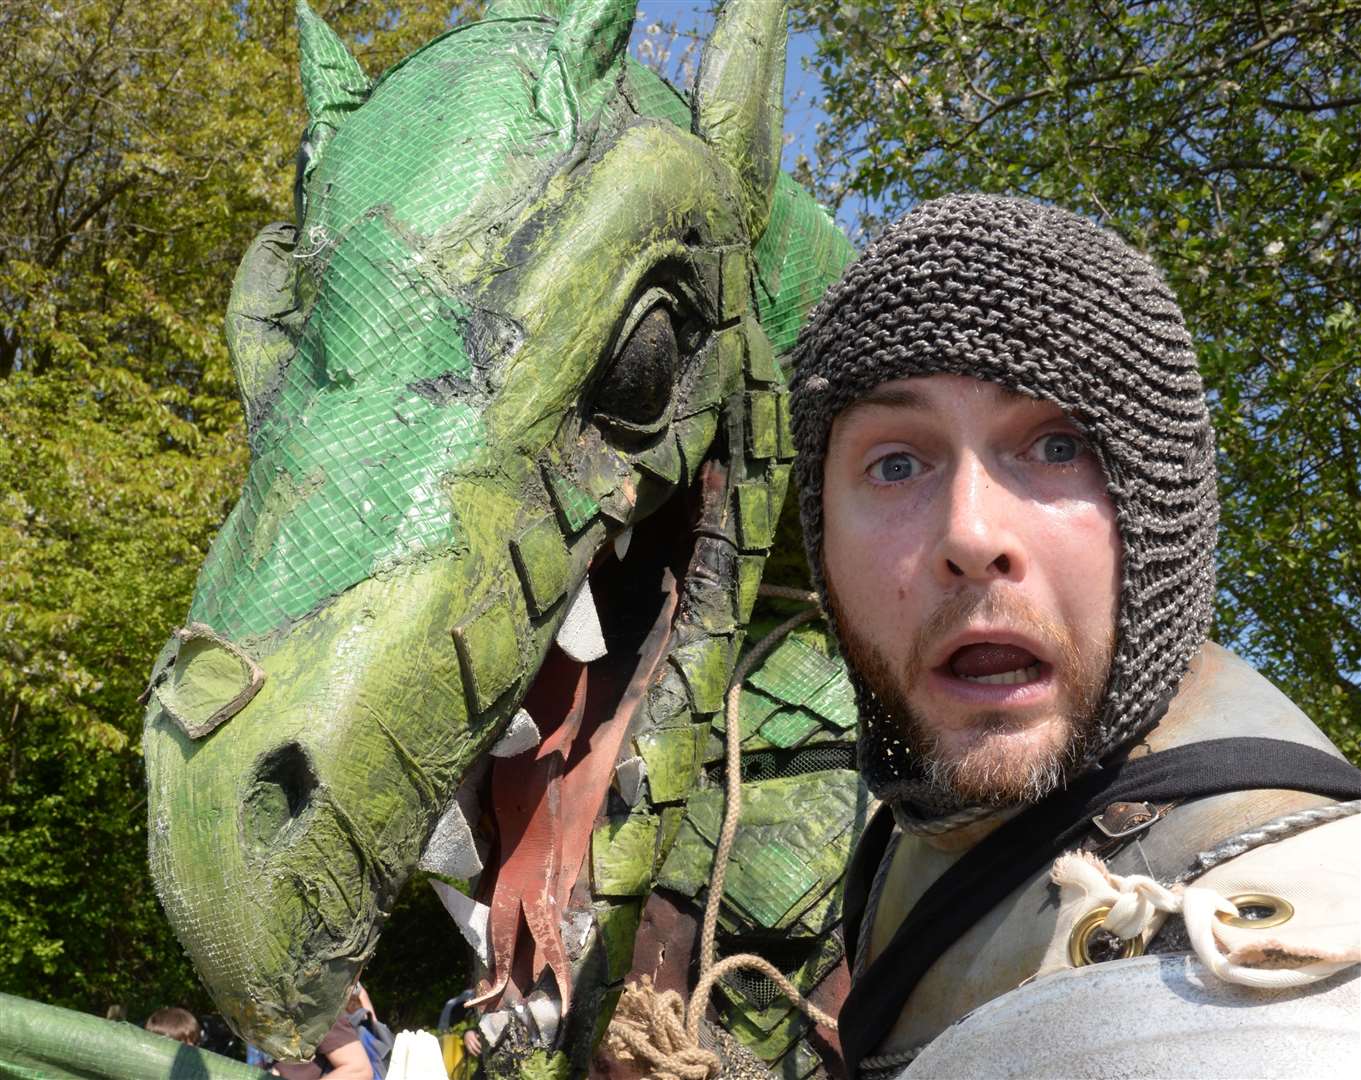 St George Jack Faires and his Dragon (Aiden Dooley) at the festival in 2019